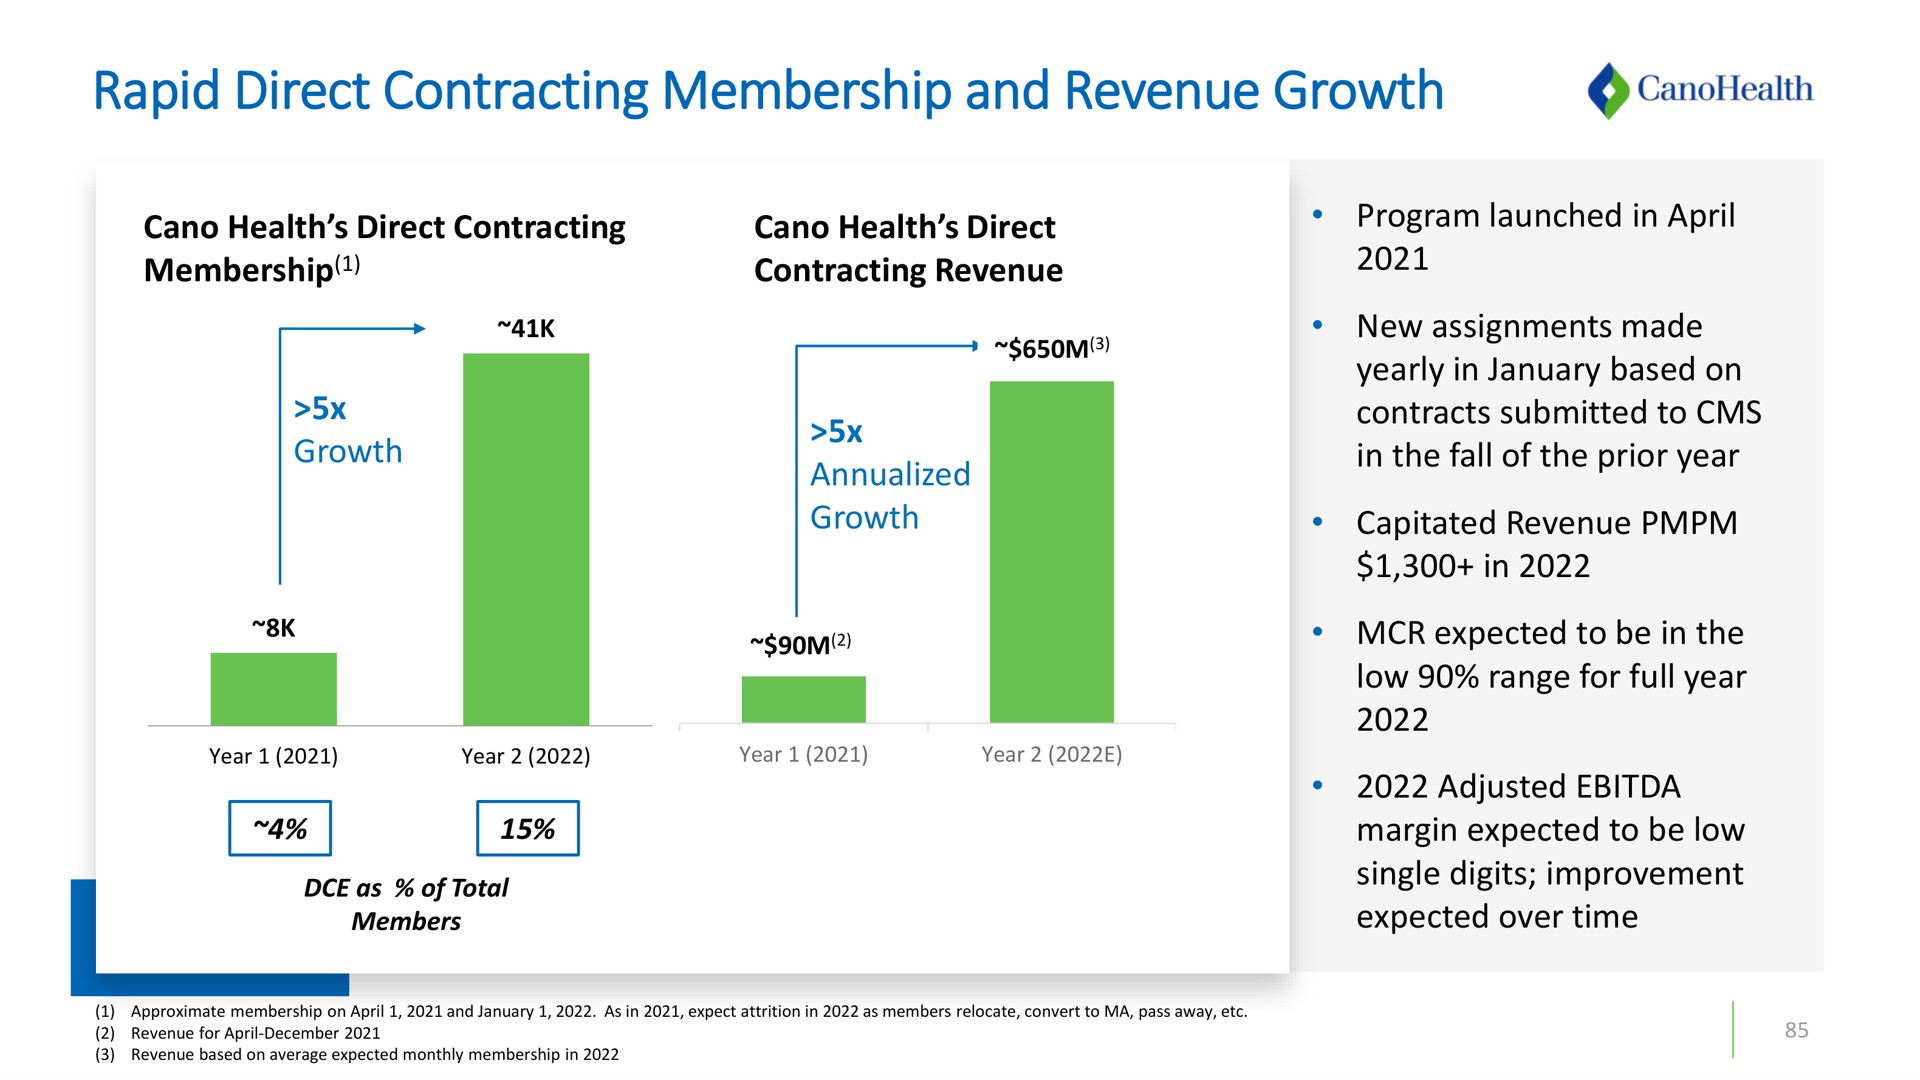 rapid direct contracting membership and revenue growth | Cano Health